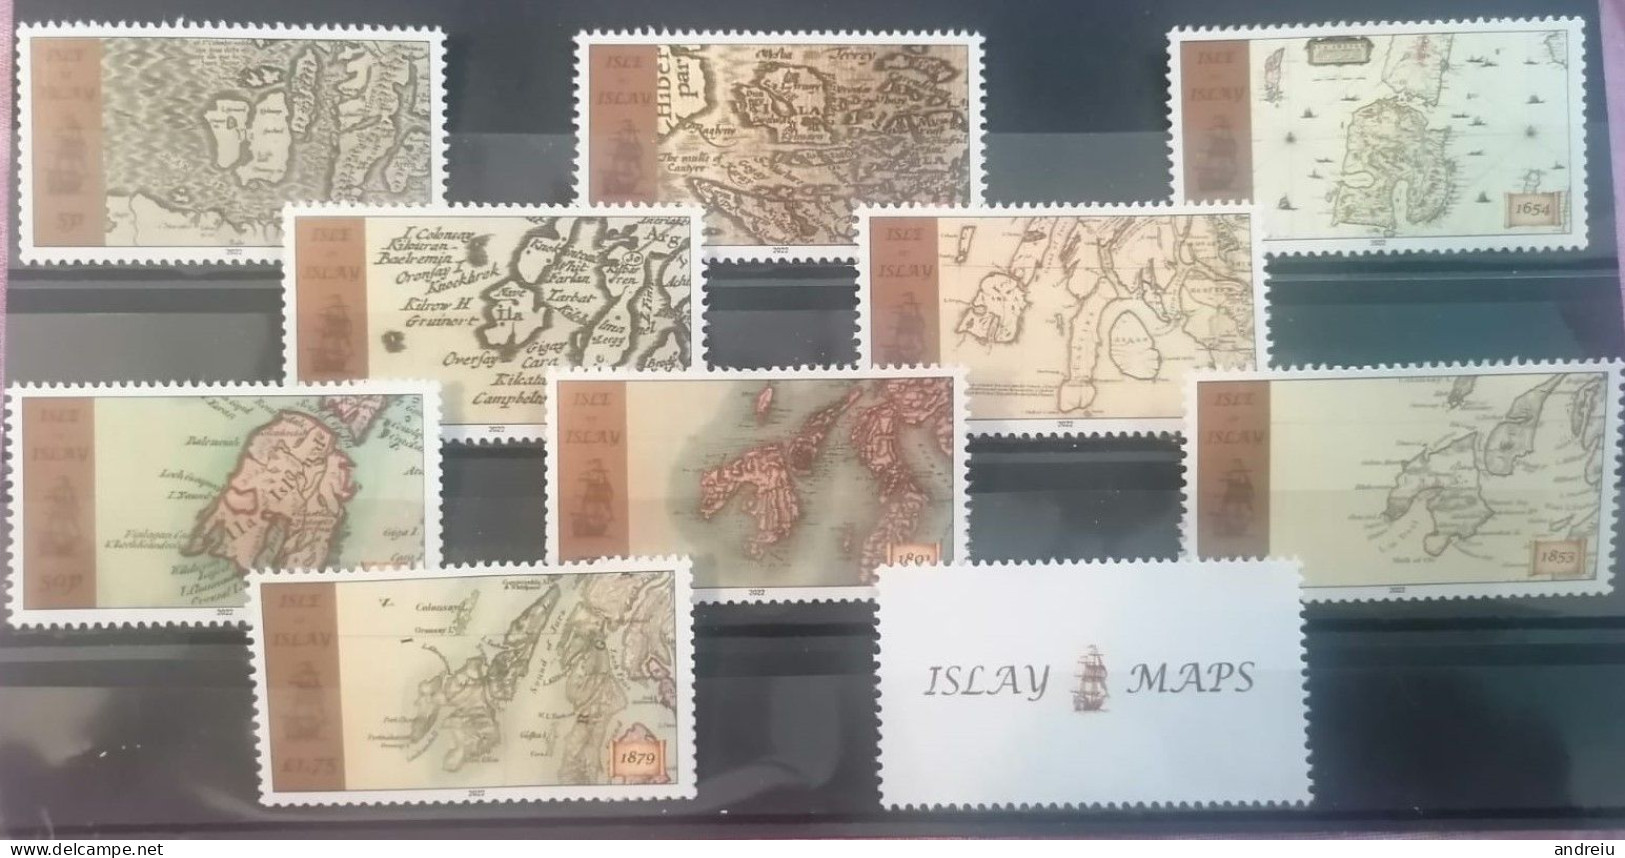 2022 GB Locals: Isle Of Islay - Old Maps Of Islay 9v+label, Geography, Cartes, Karten, Mapas MNH - Inseln